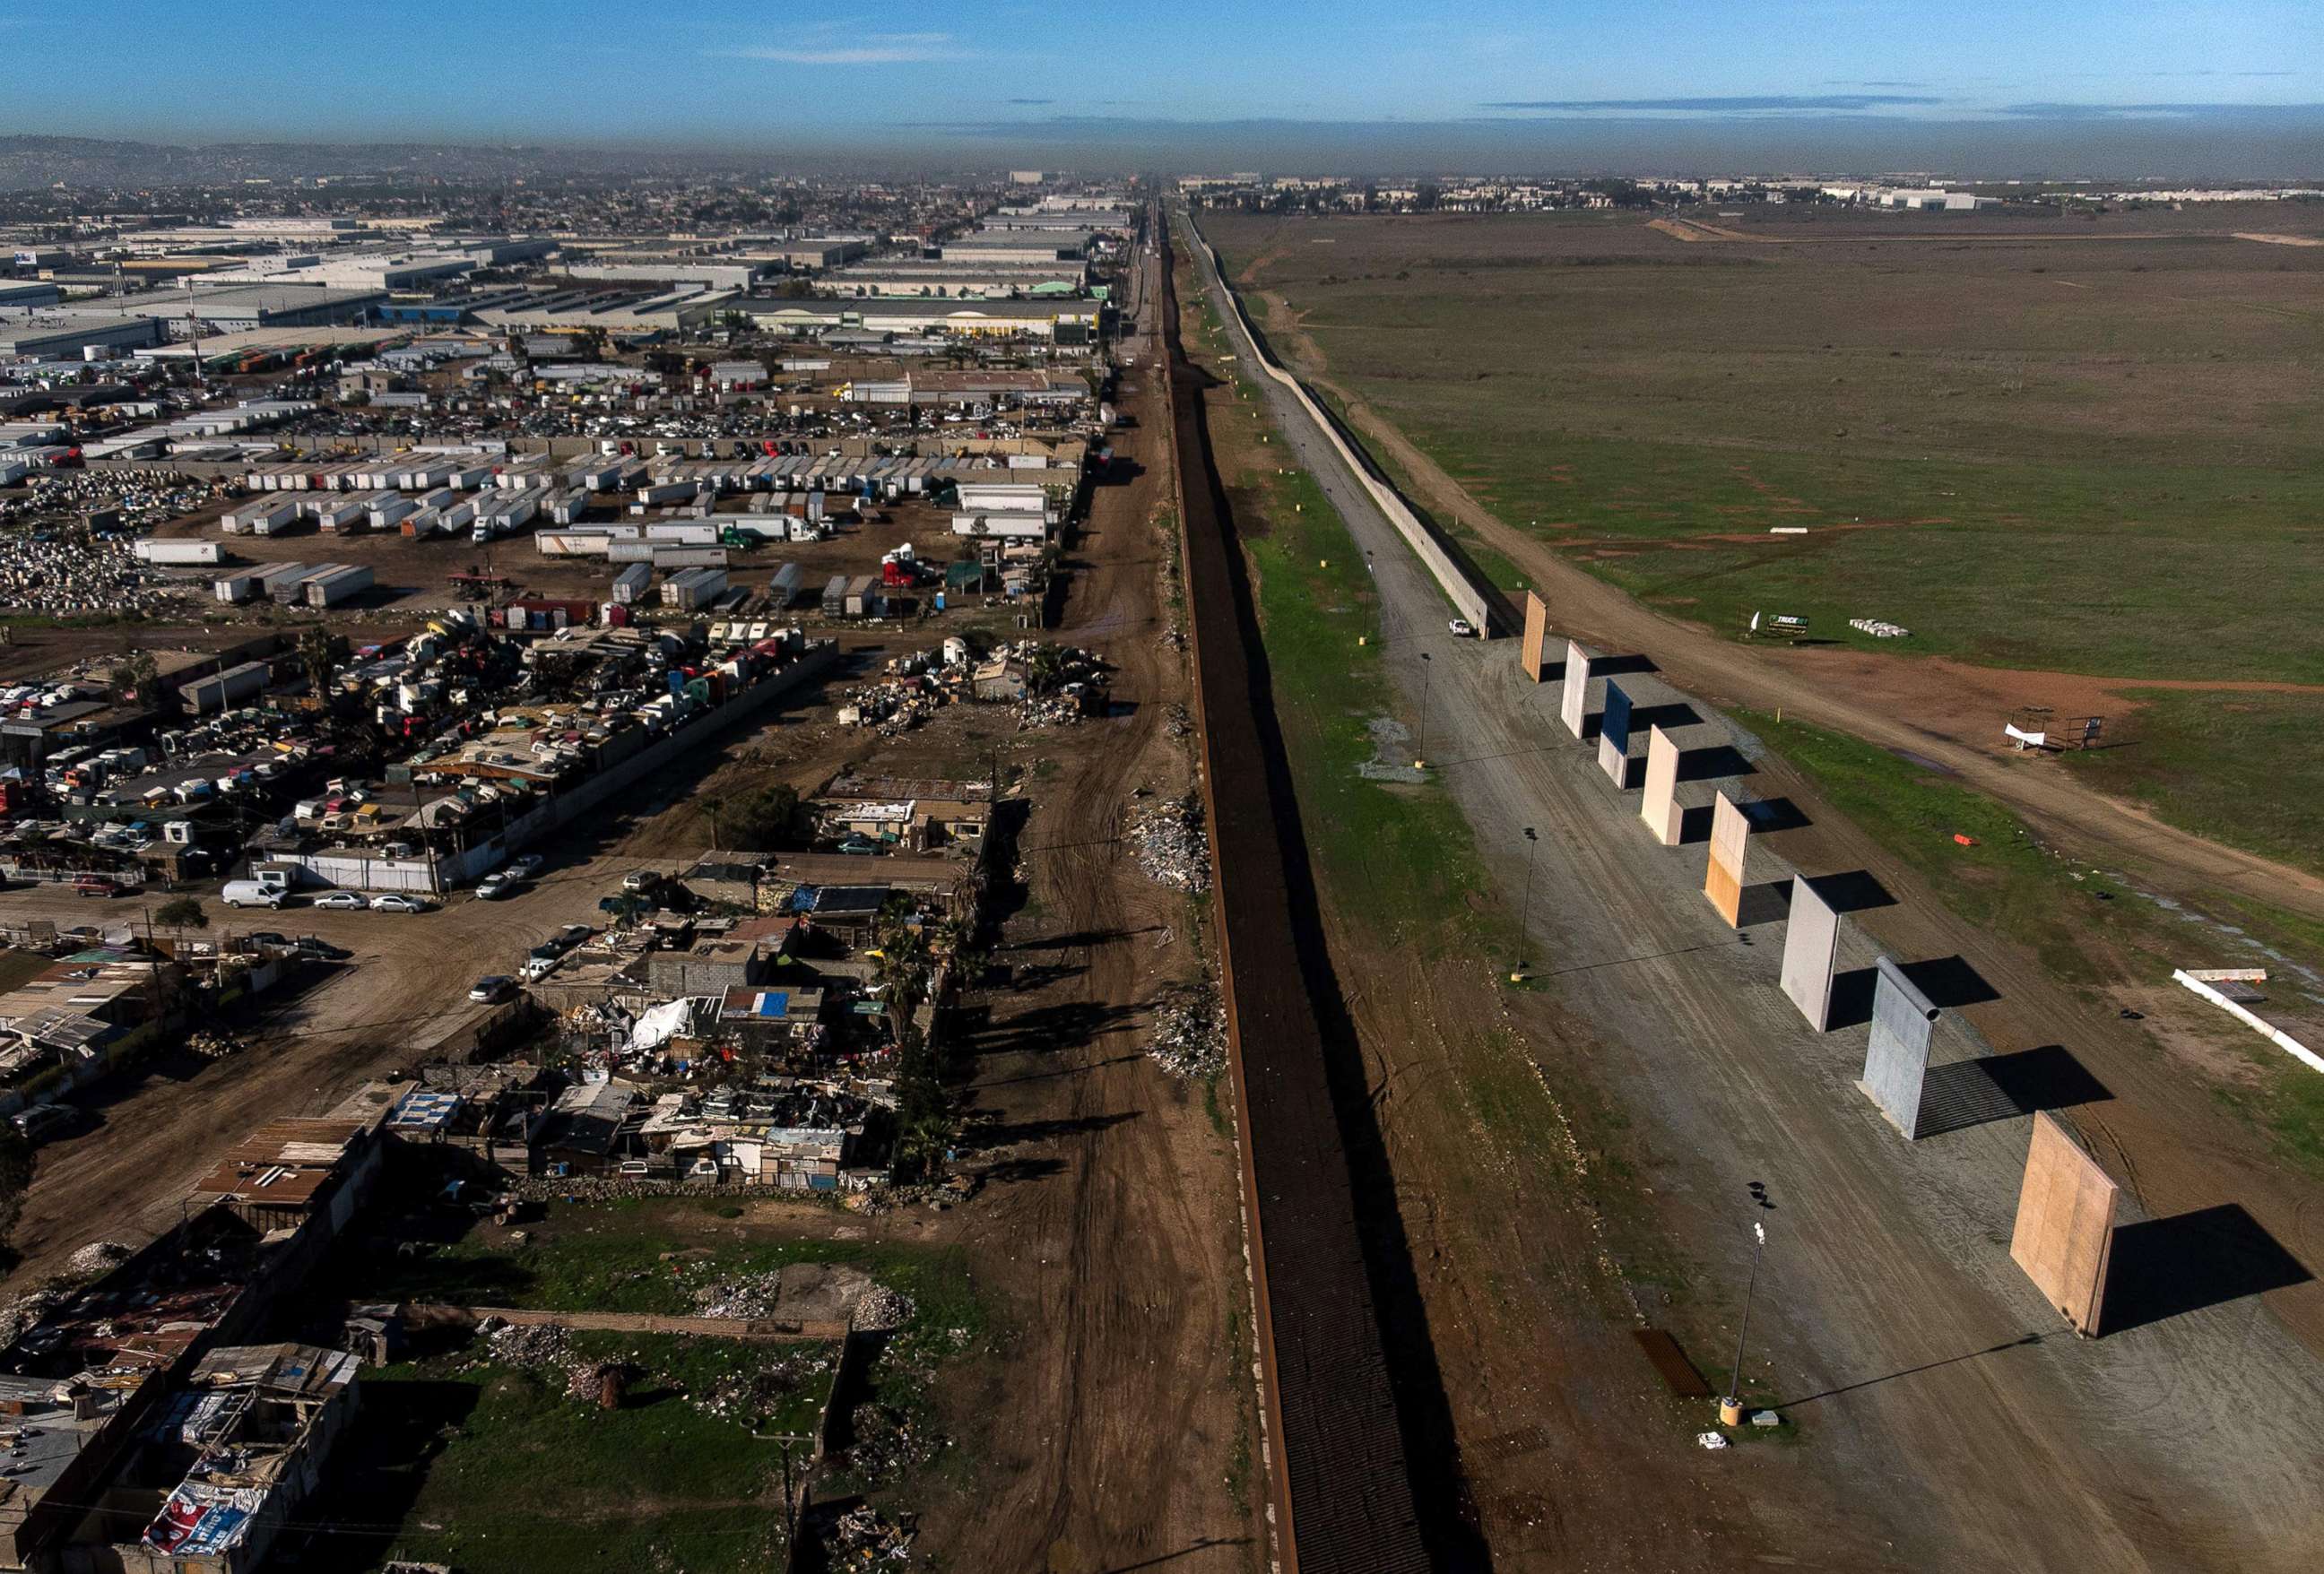 PHOTO: A view from above of the border wall prototypes near Tijuana, in Baja California state, Mexico, Jan. 7, 2019.